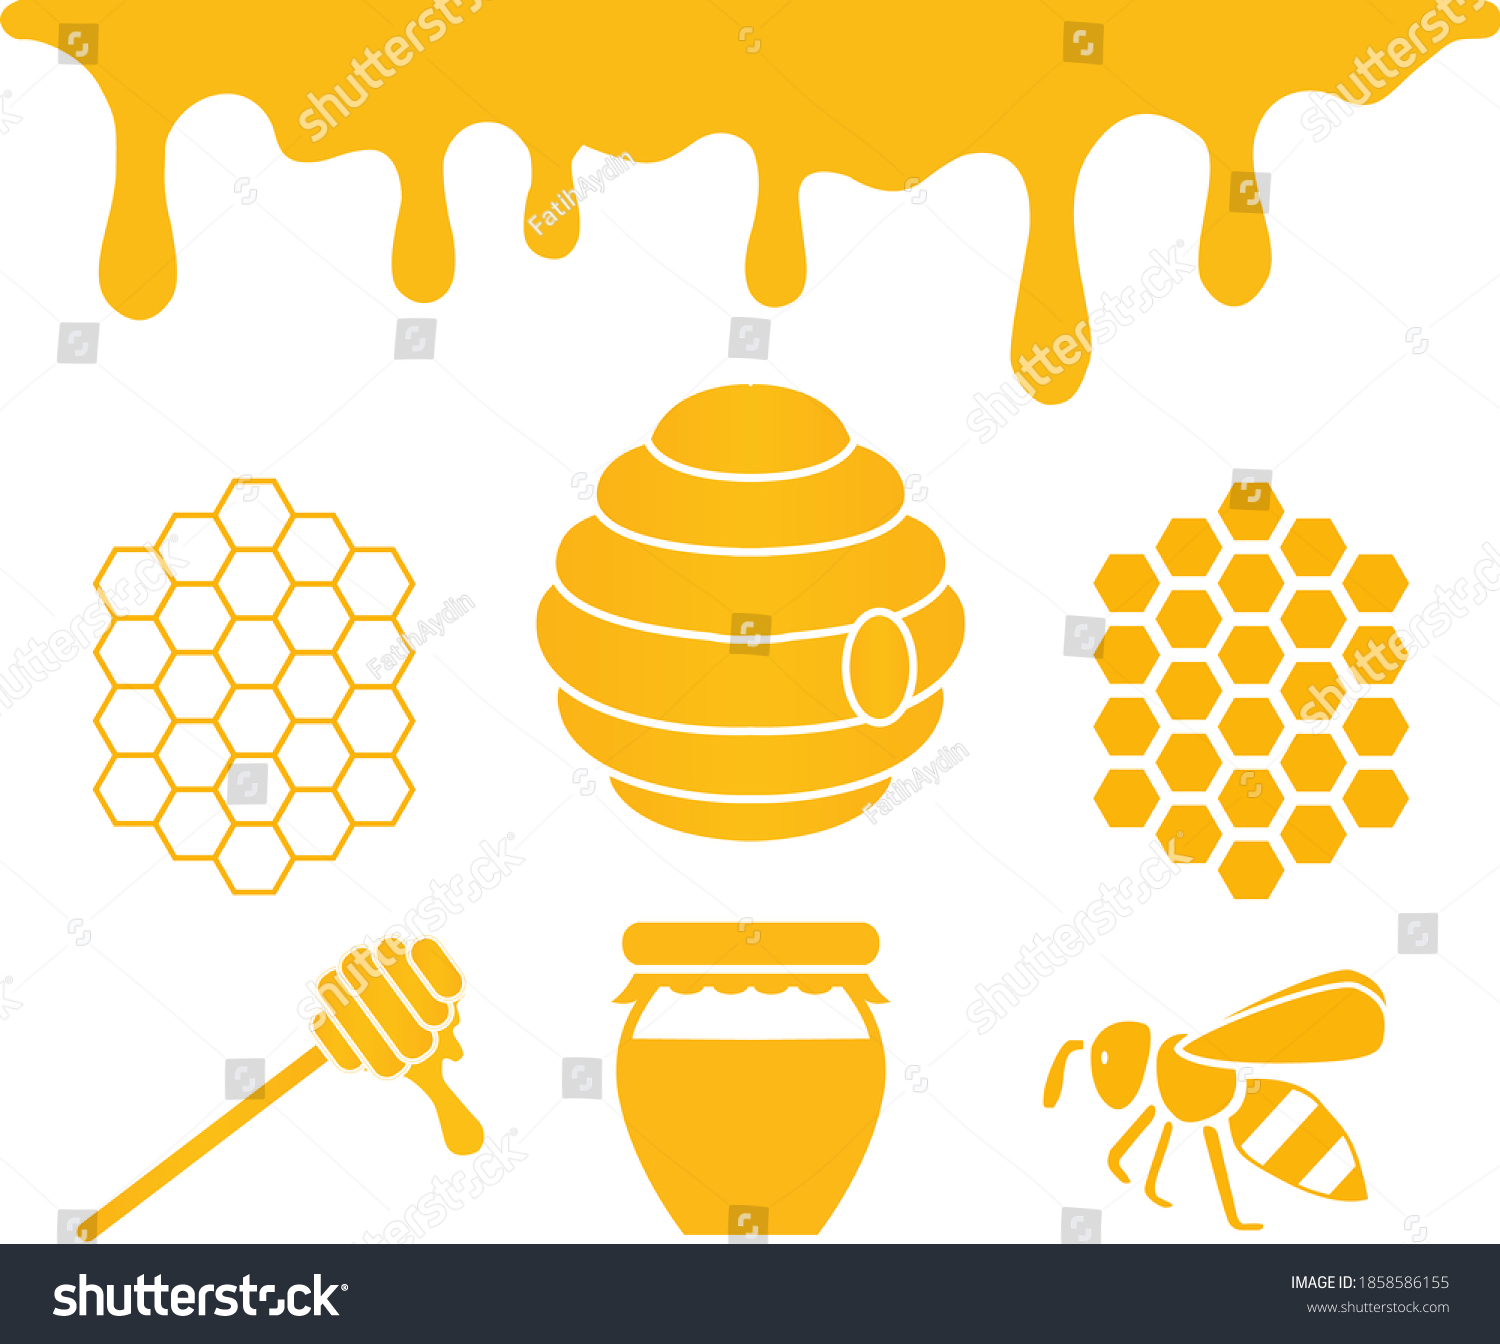 Honey Bee Icons Vector Illustrations Stock Vector (Royalty Free) 1858586155...